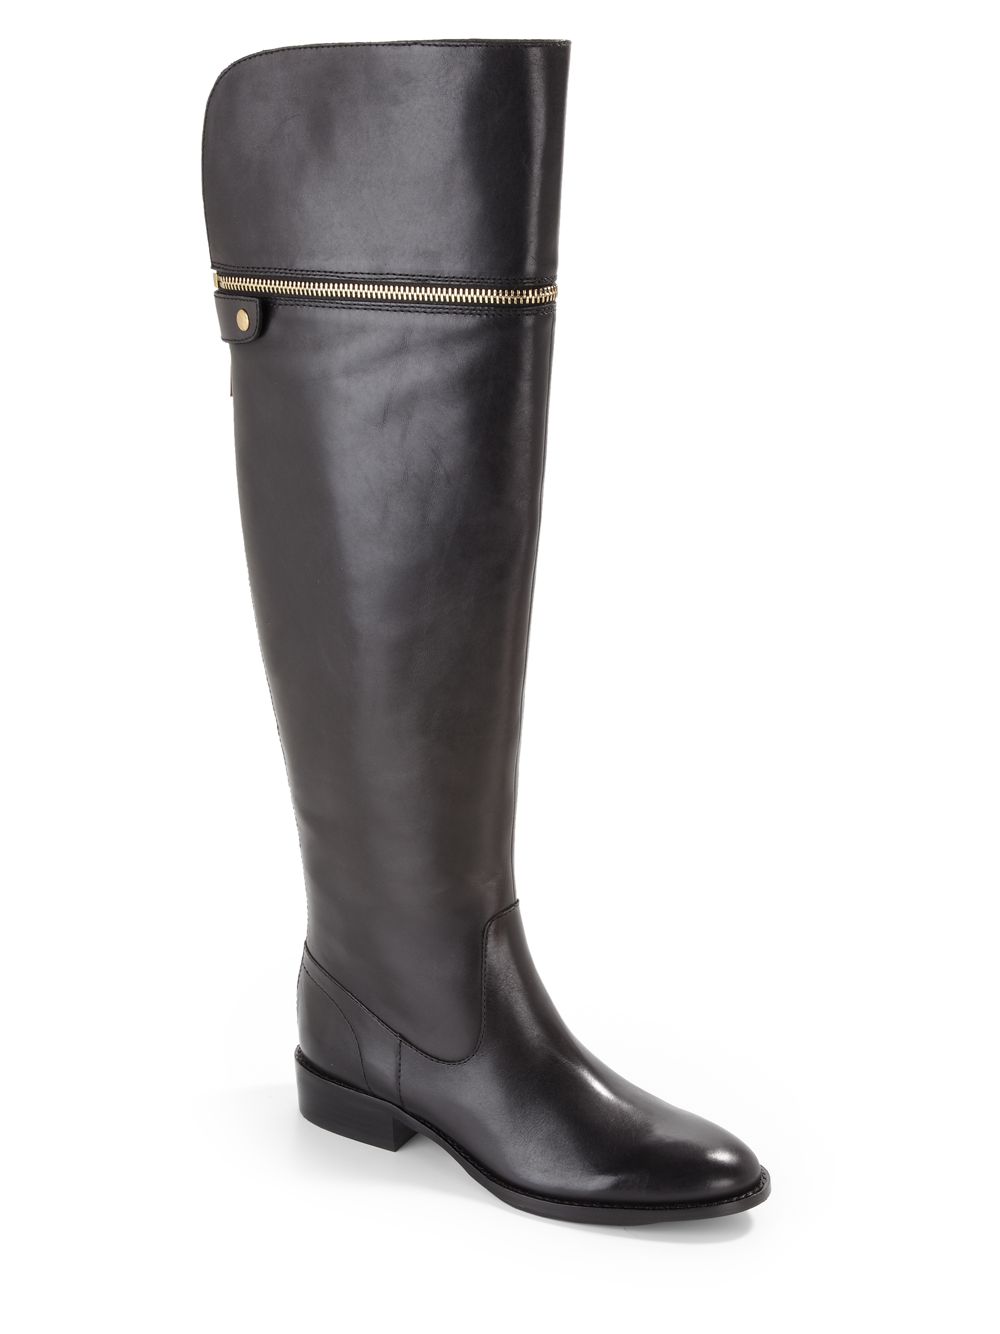 Lyst - Saks fifth avenue black label Ash Leather Riding Boots in Black